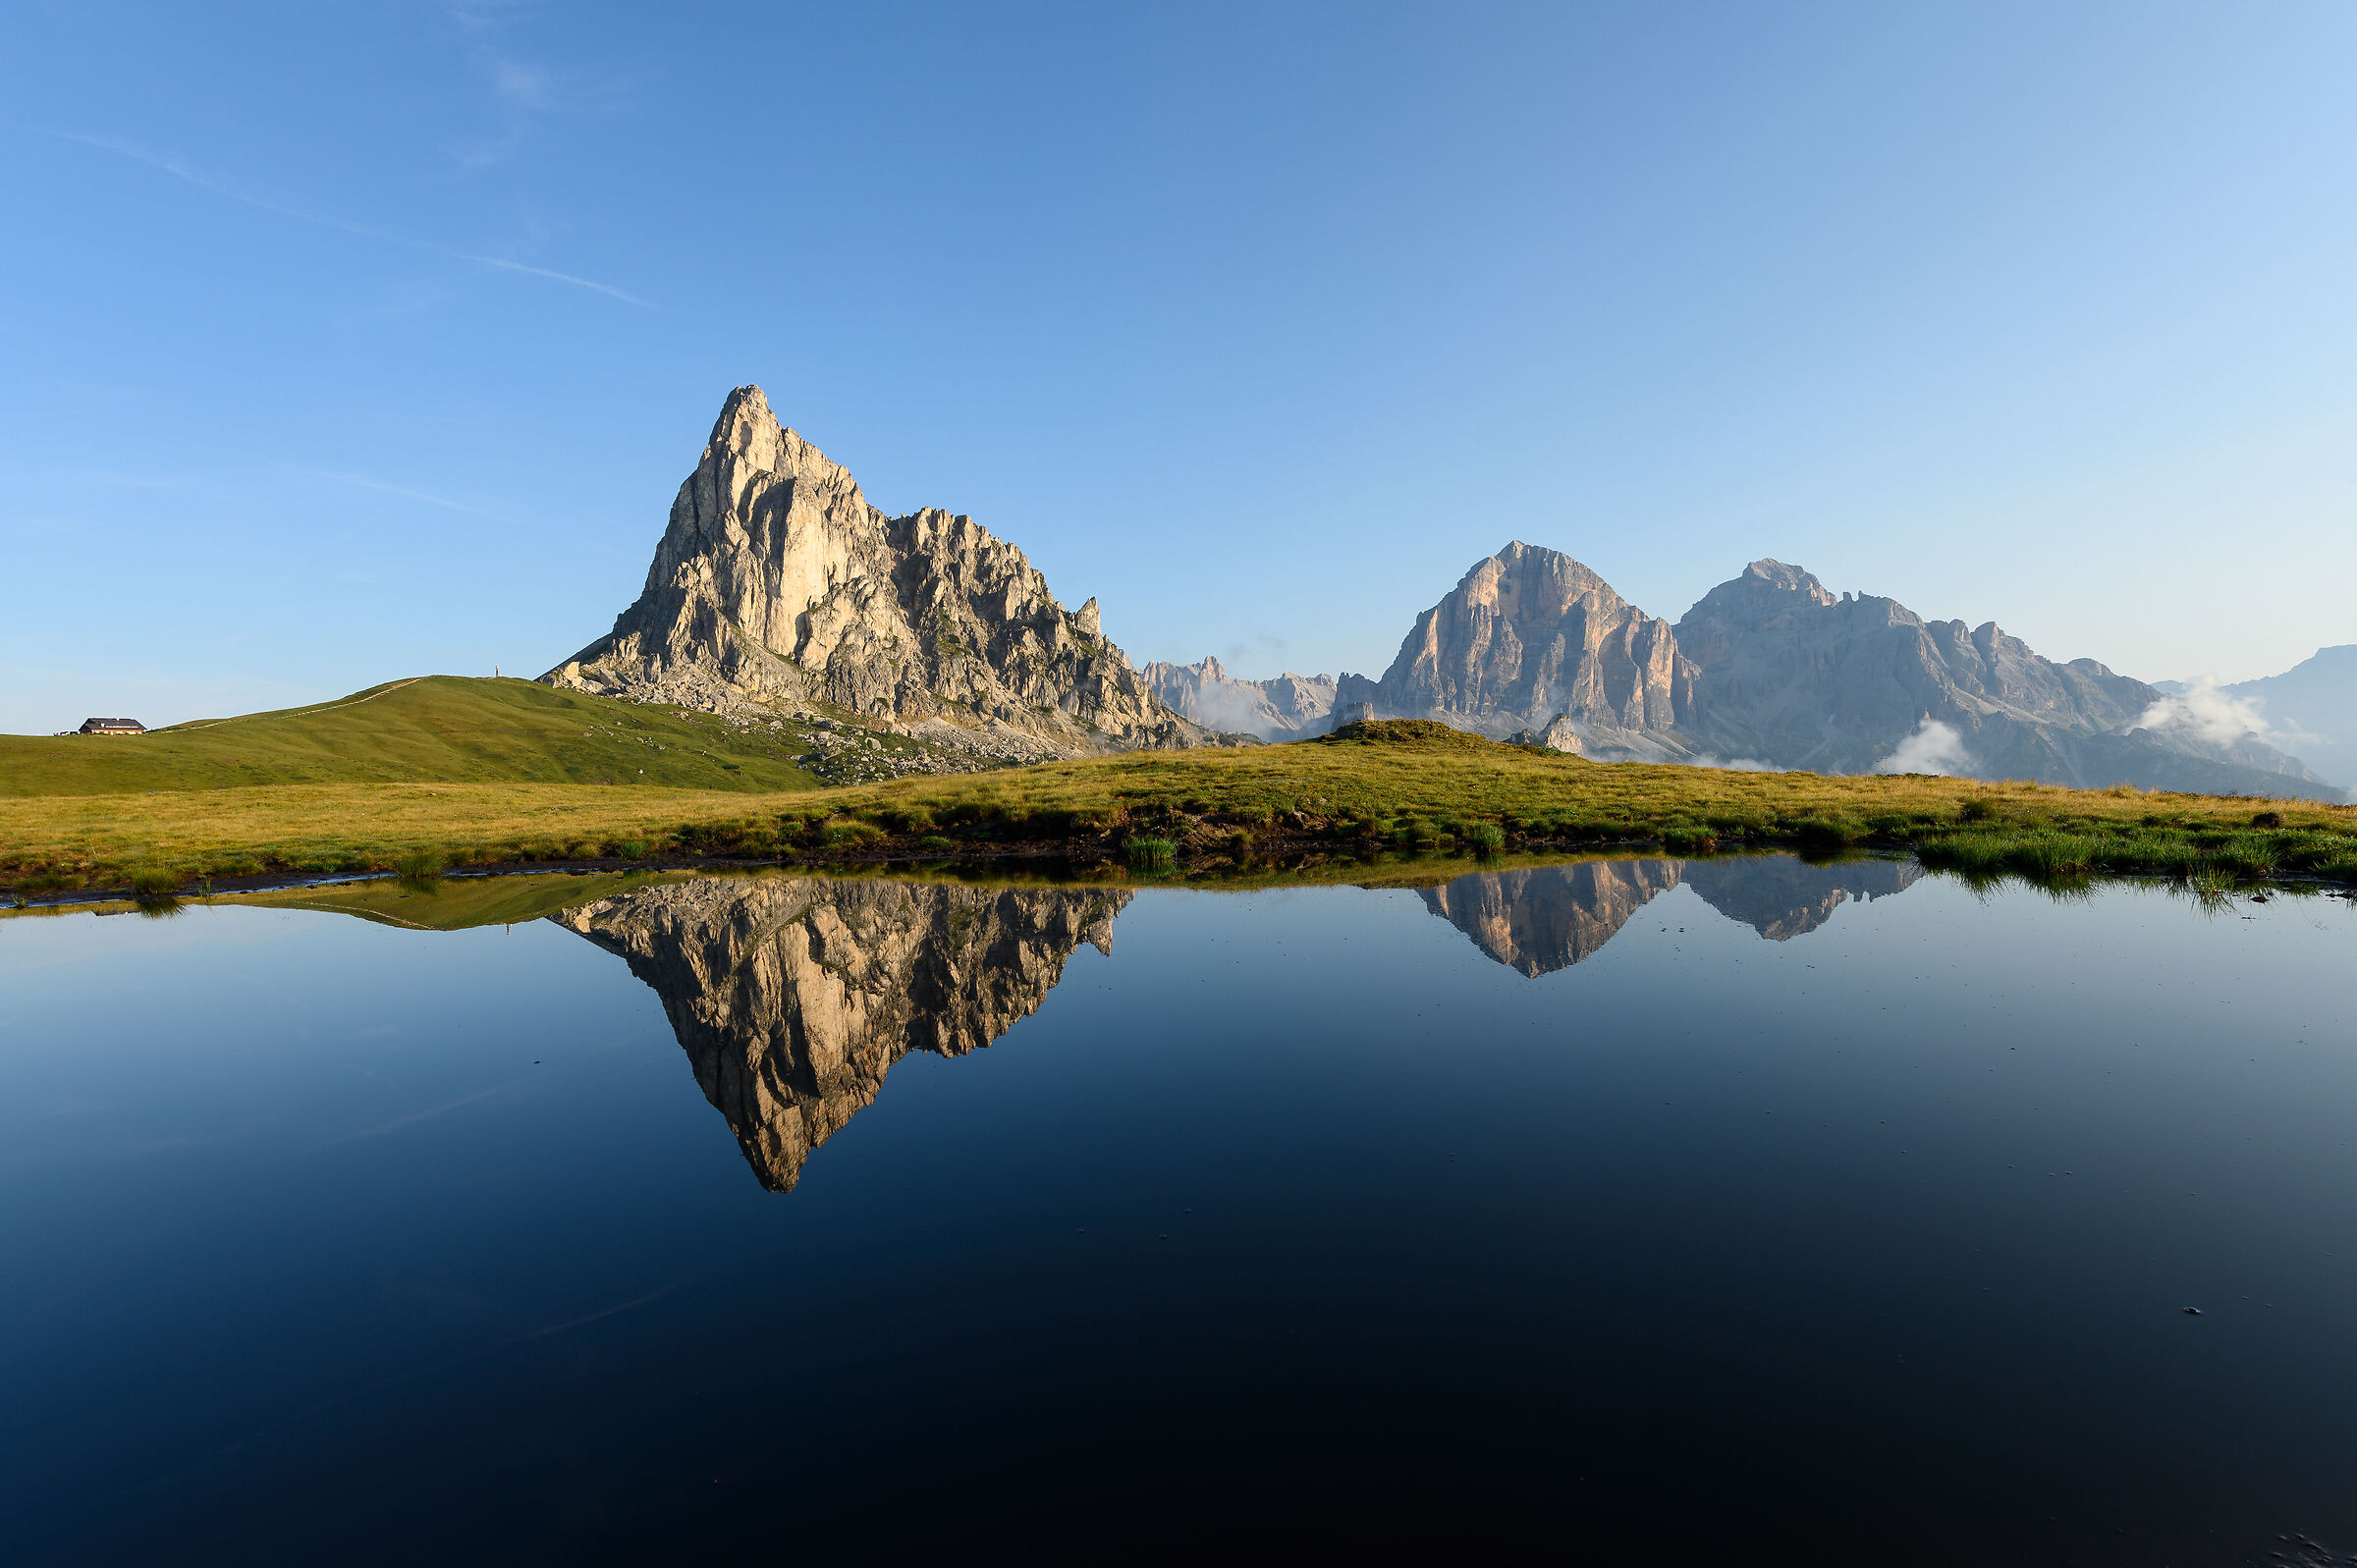 Reflections at Passo Giau...